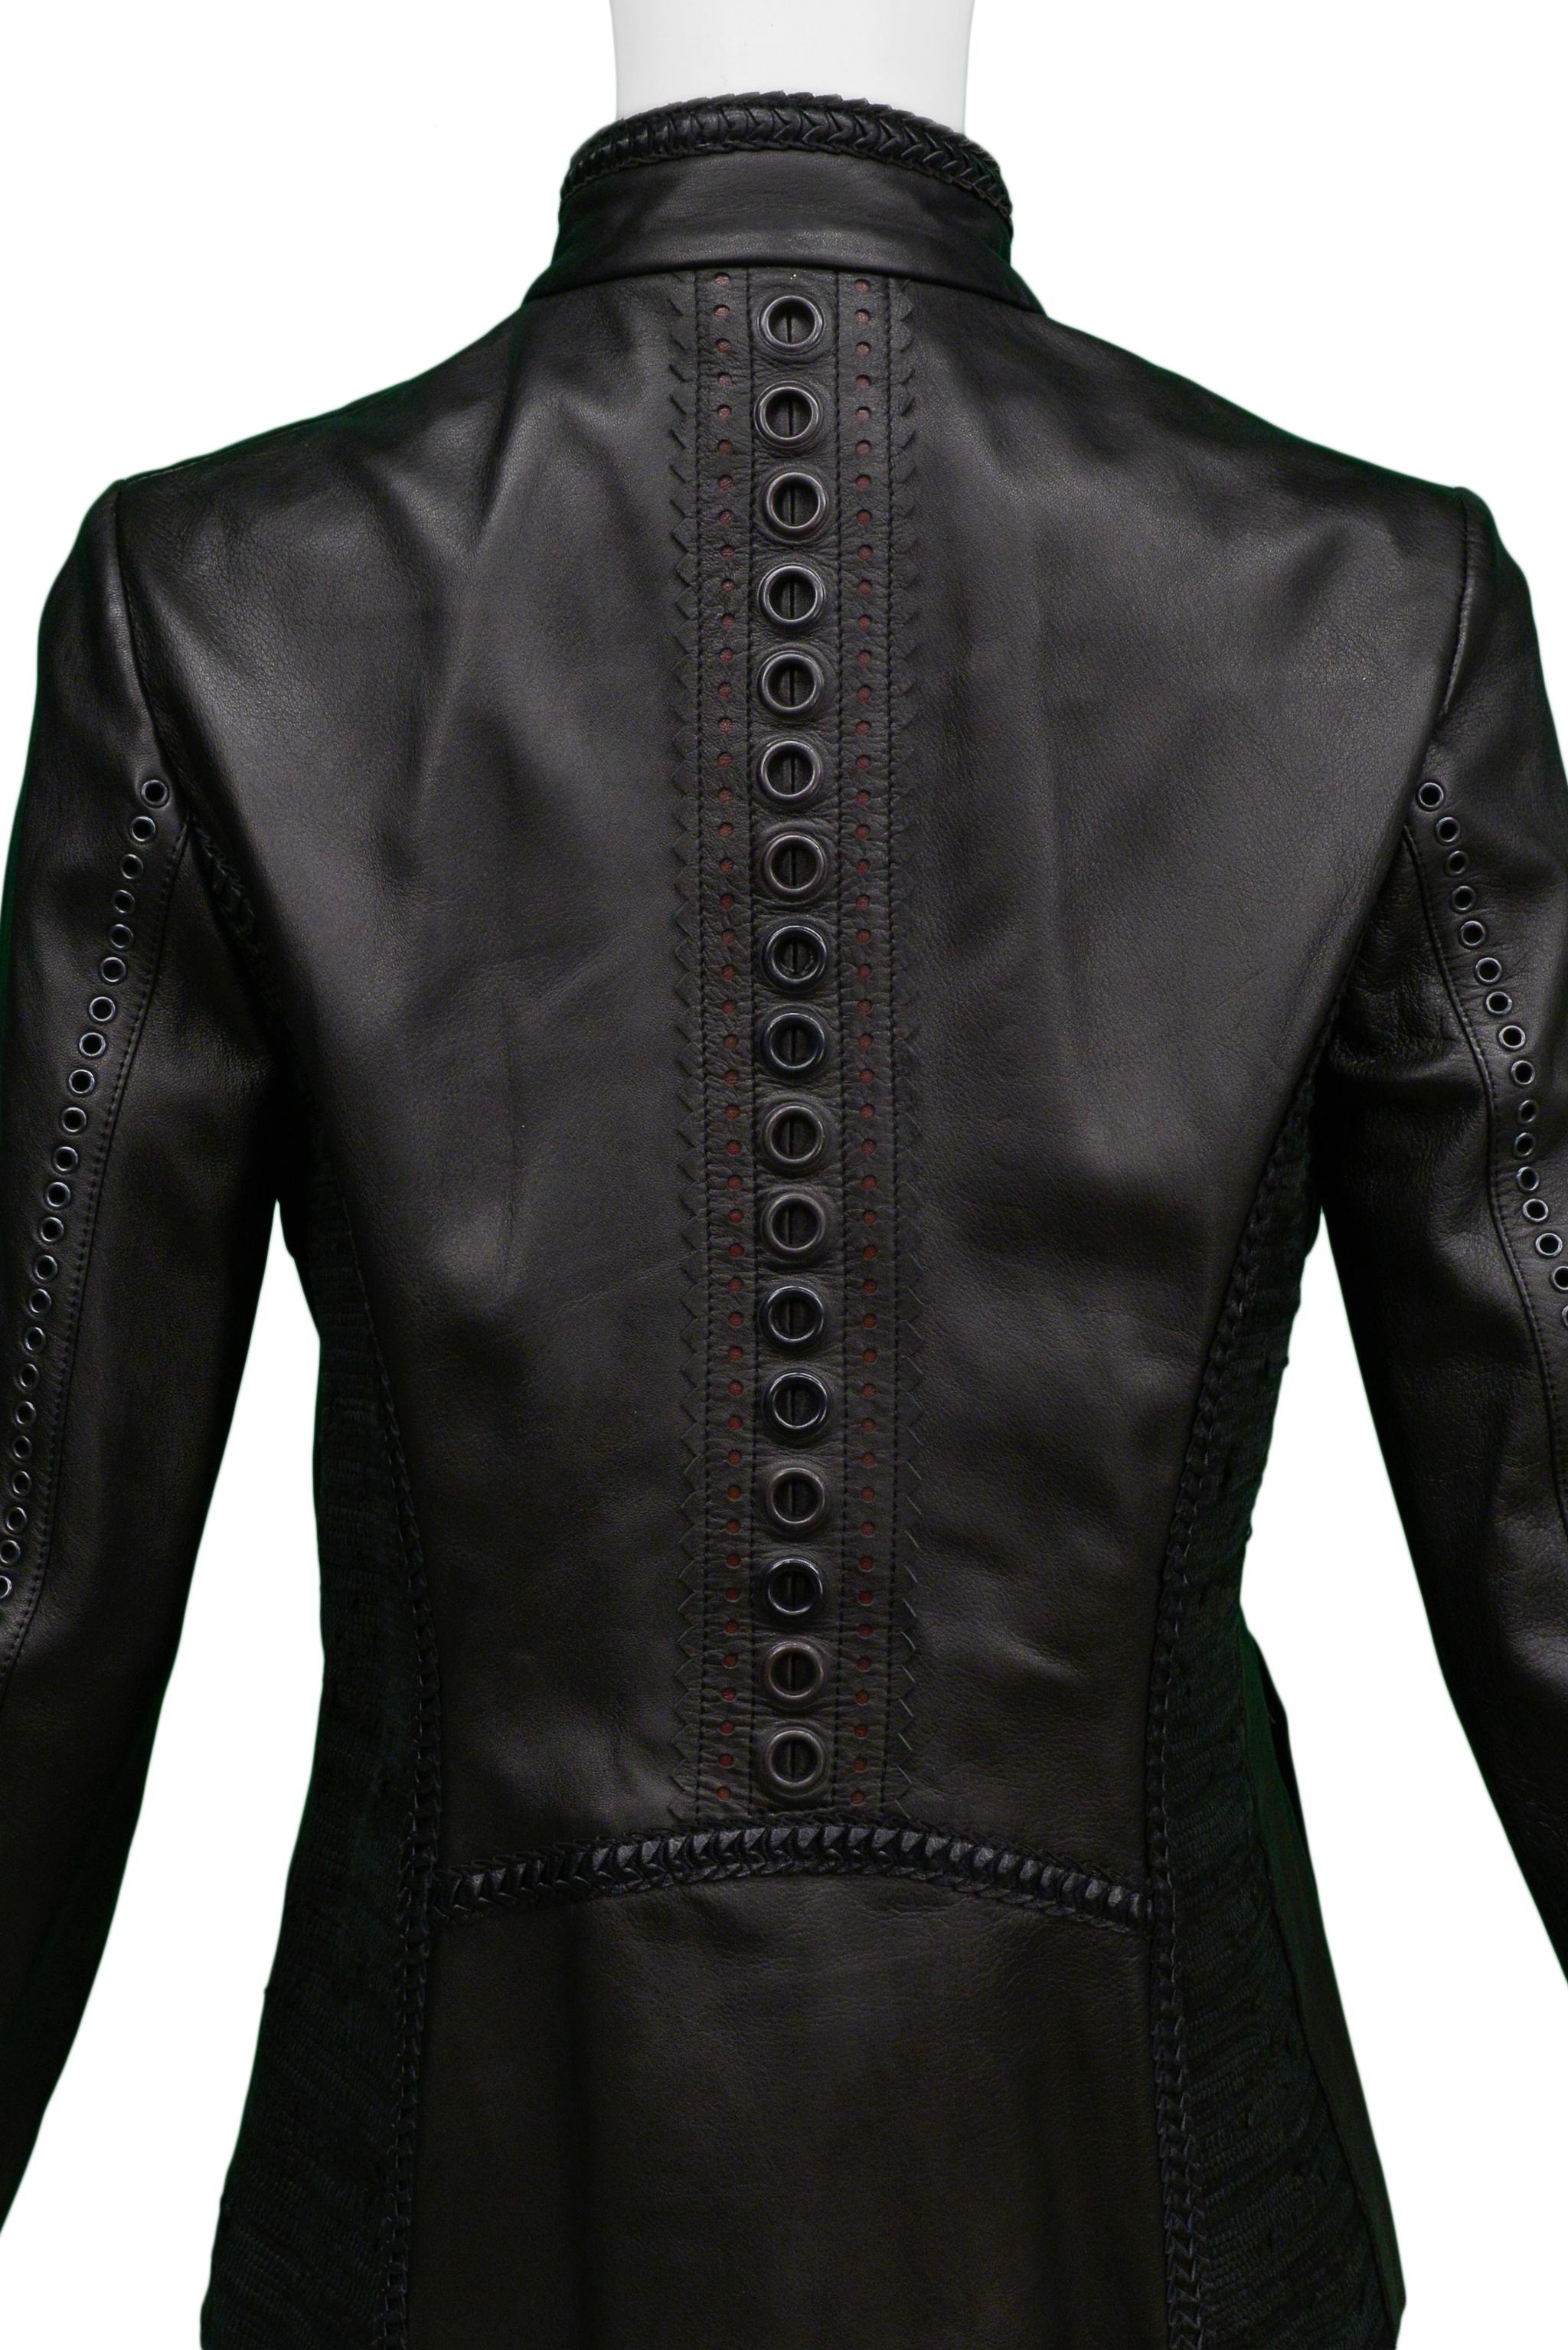 Men's Stunning Gianfranco Ferre Black Motorcycle Leather Jacket With Fur Trim For Sale